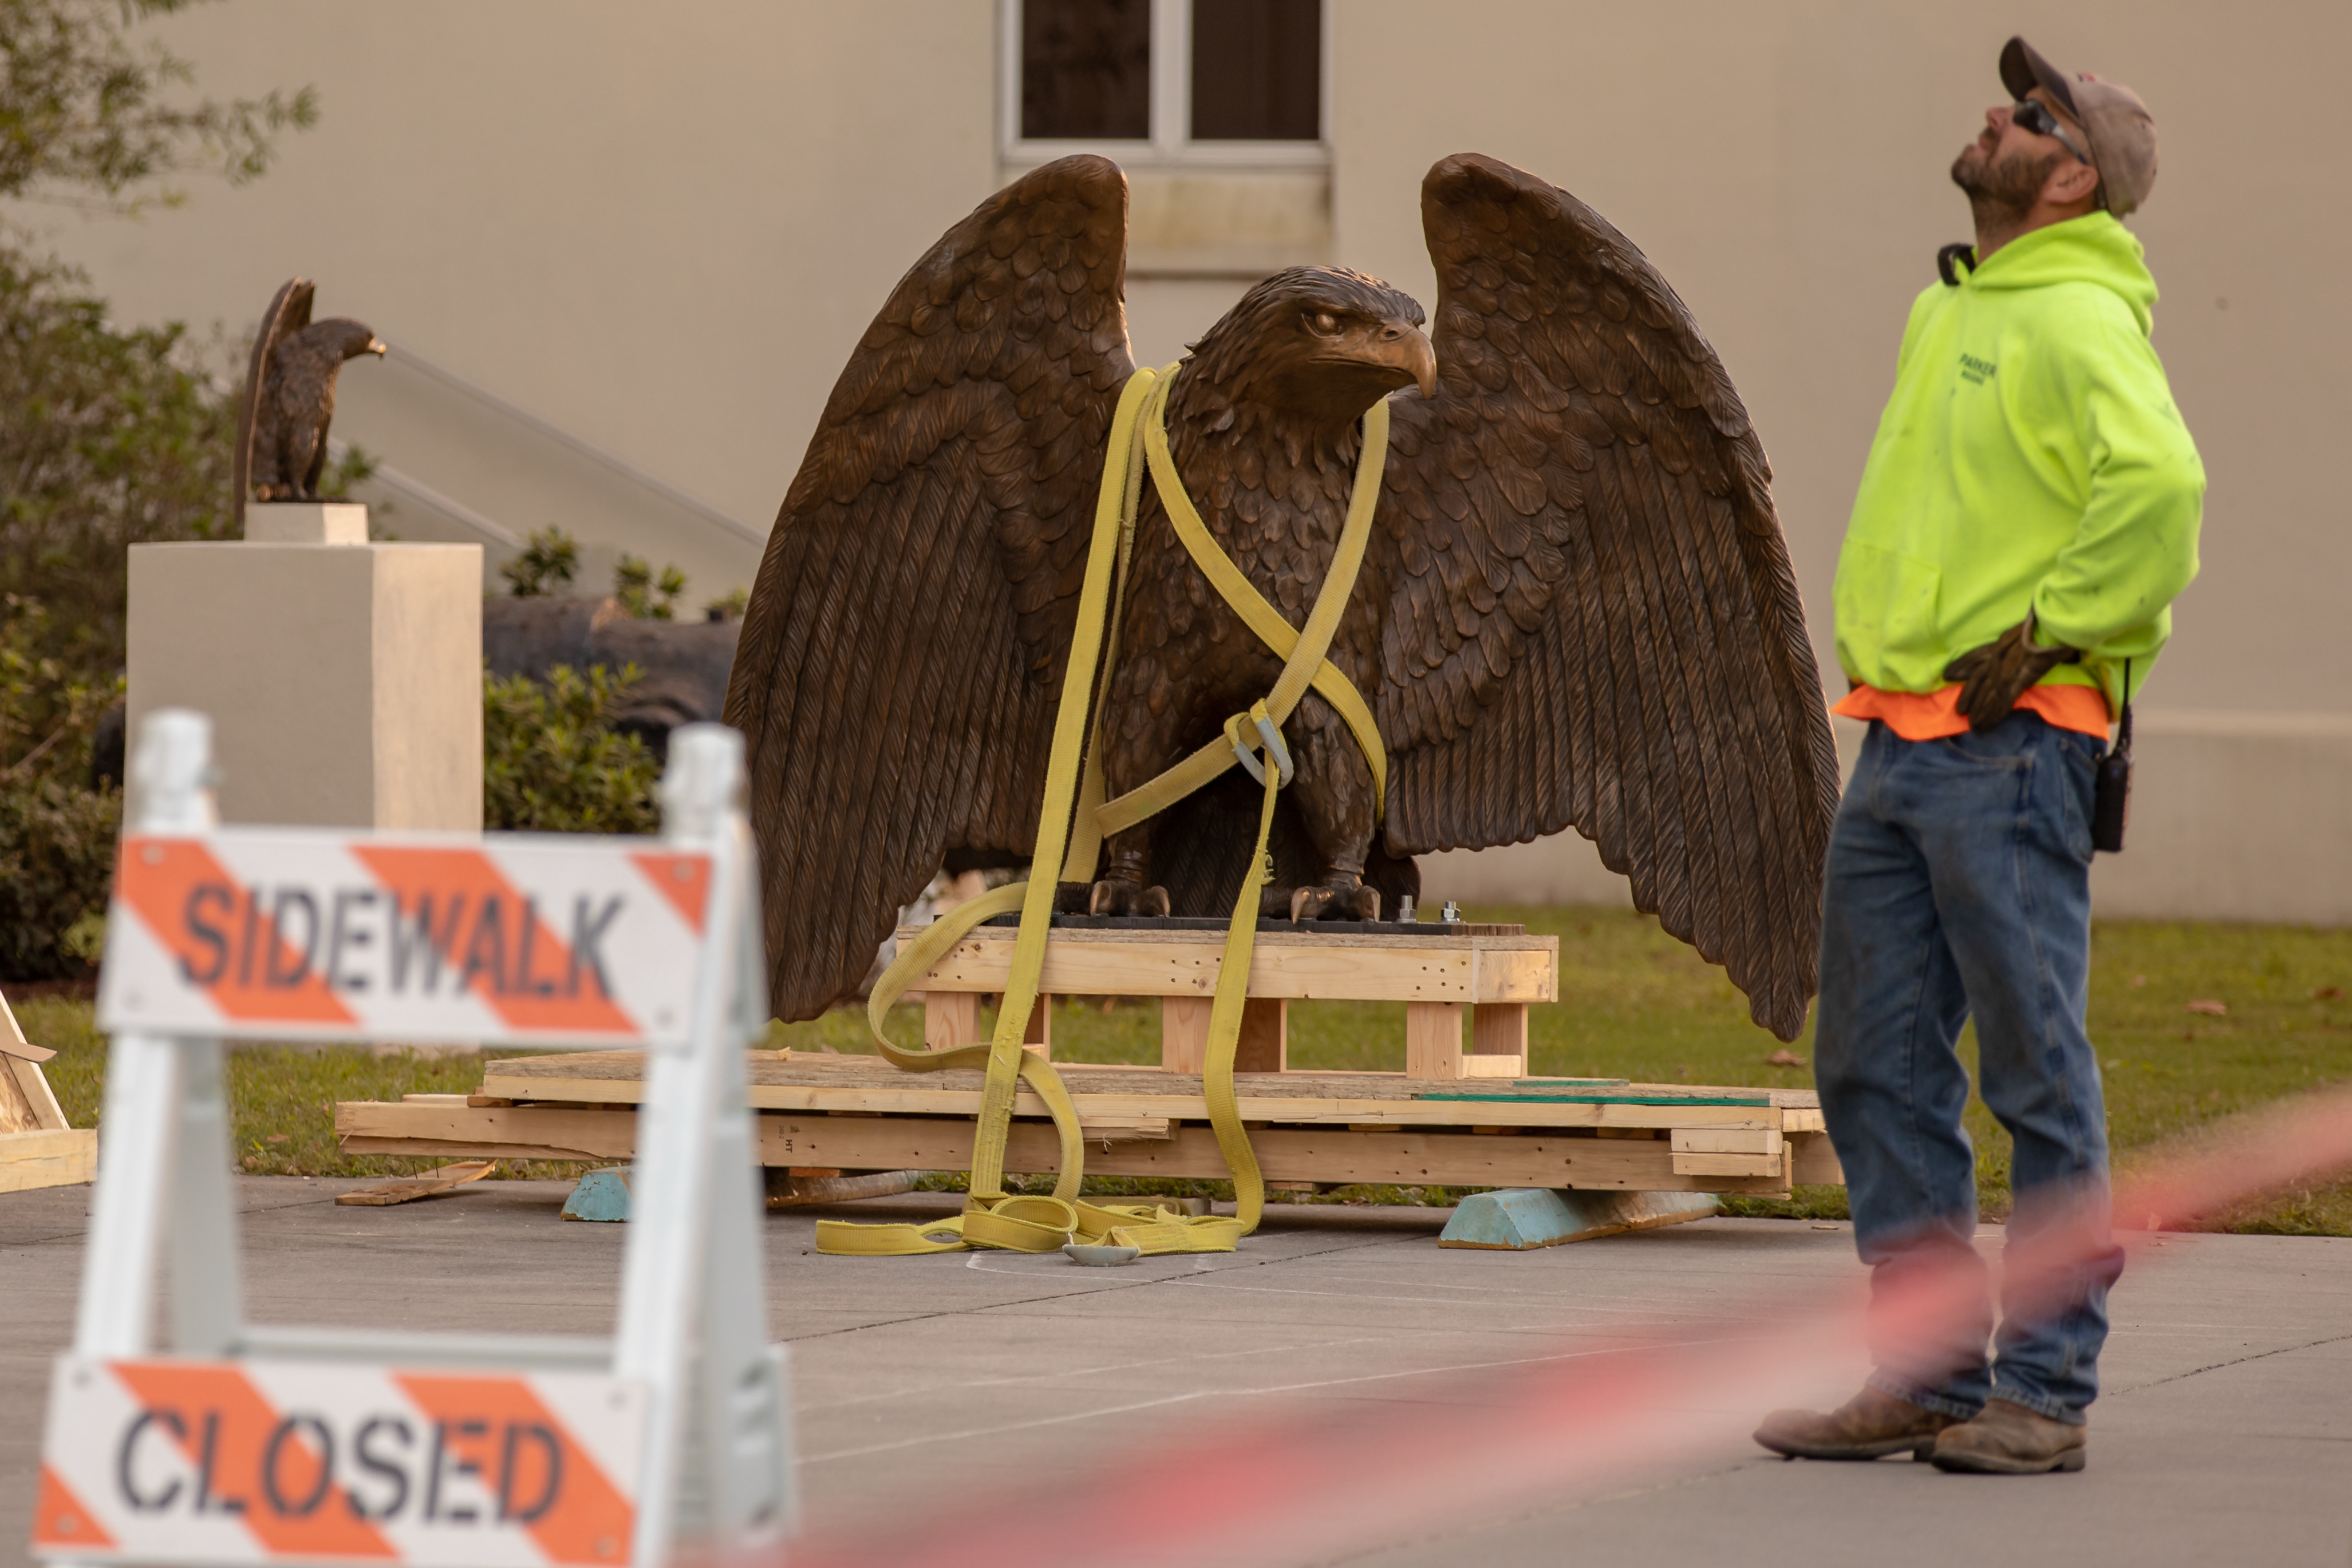 Bond Hall eagle being replaced